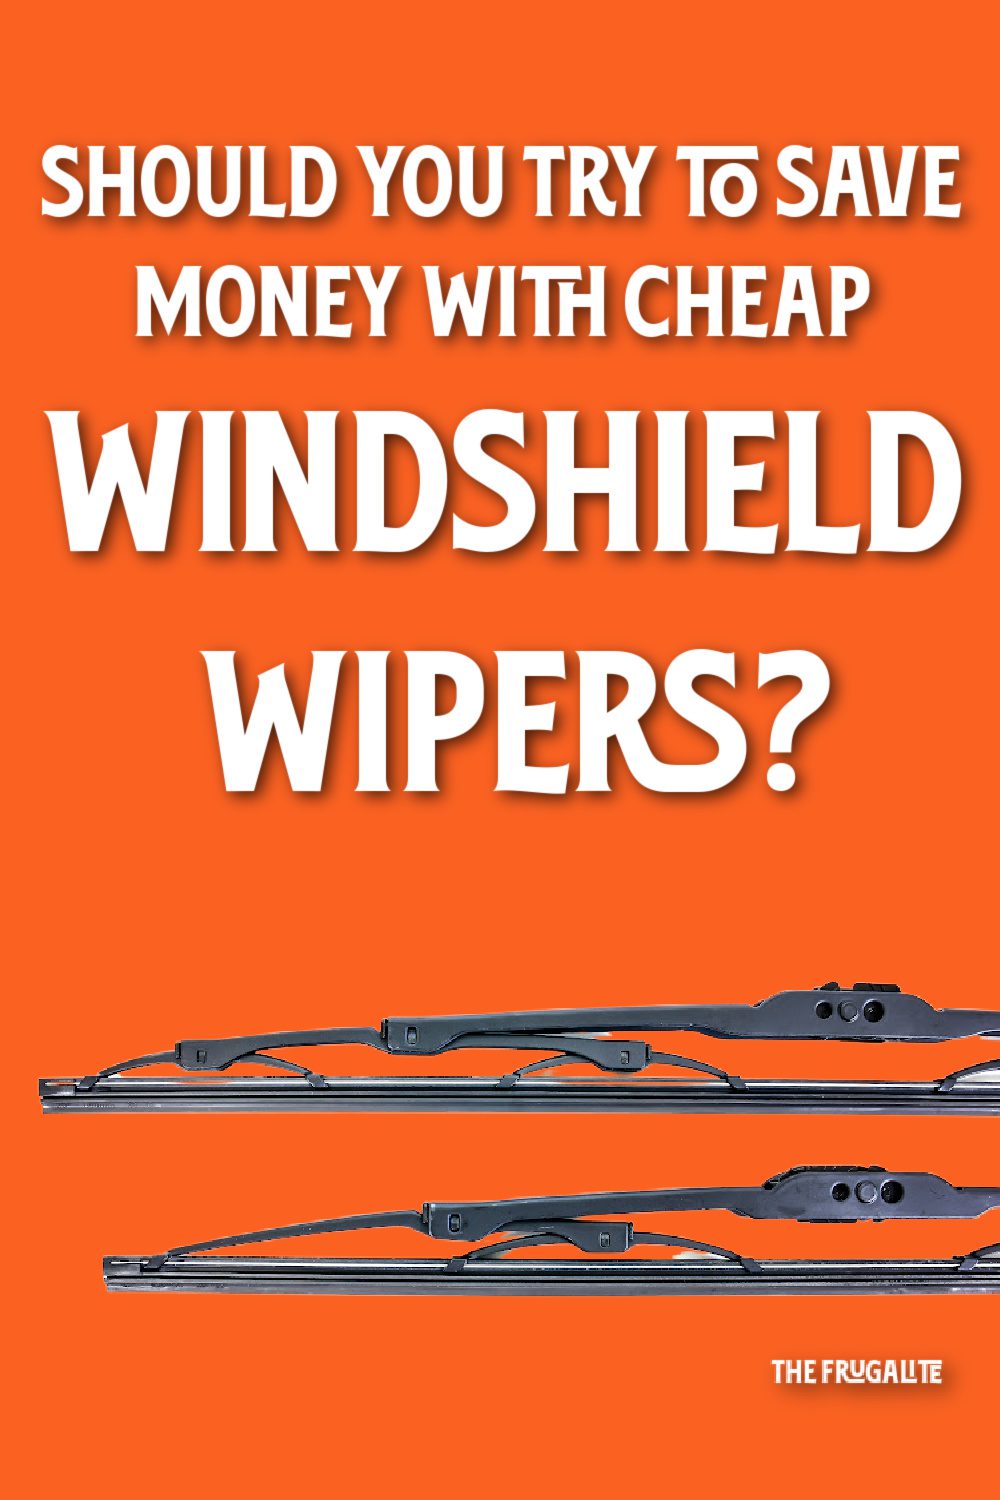 Should You Try to Save Money with Cheap Windshield Wipers?